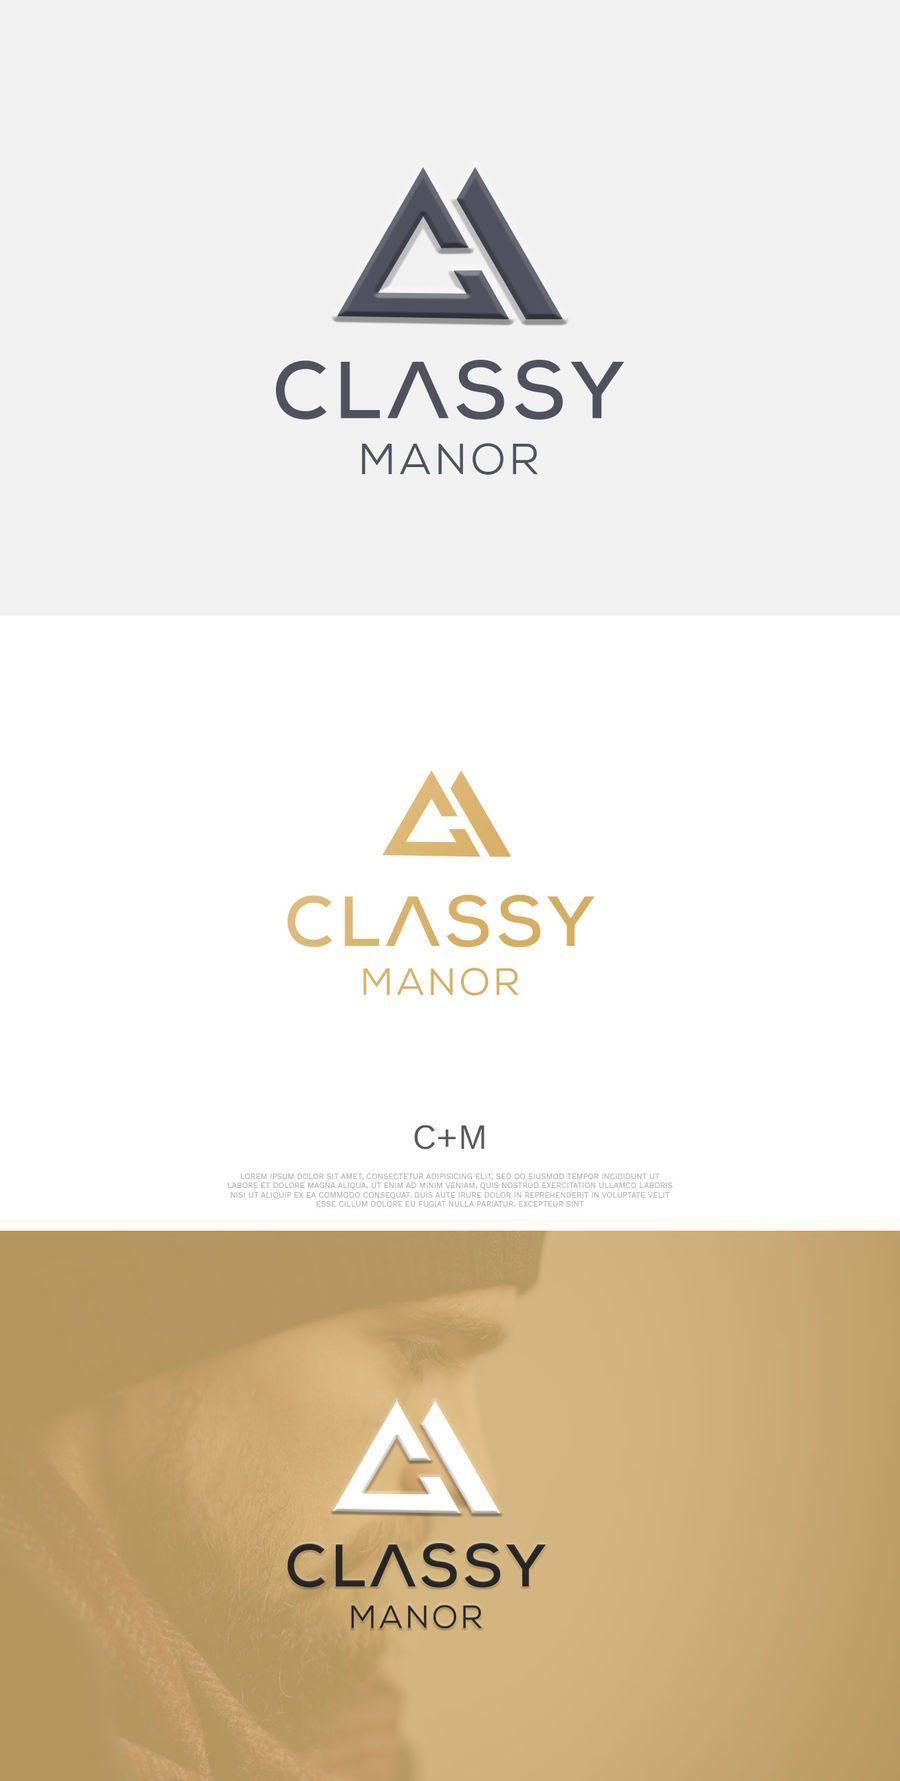 Royal Clothing Logo - Entry by mithunray for The brand name is “Classy Manor”. It is a